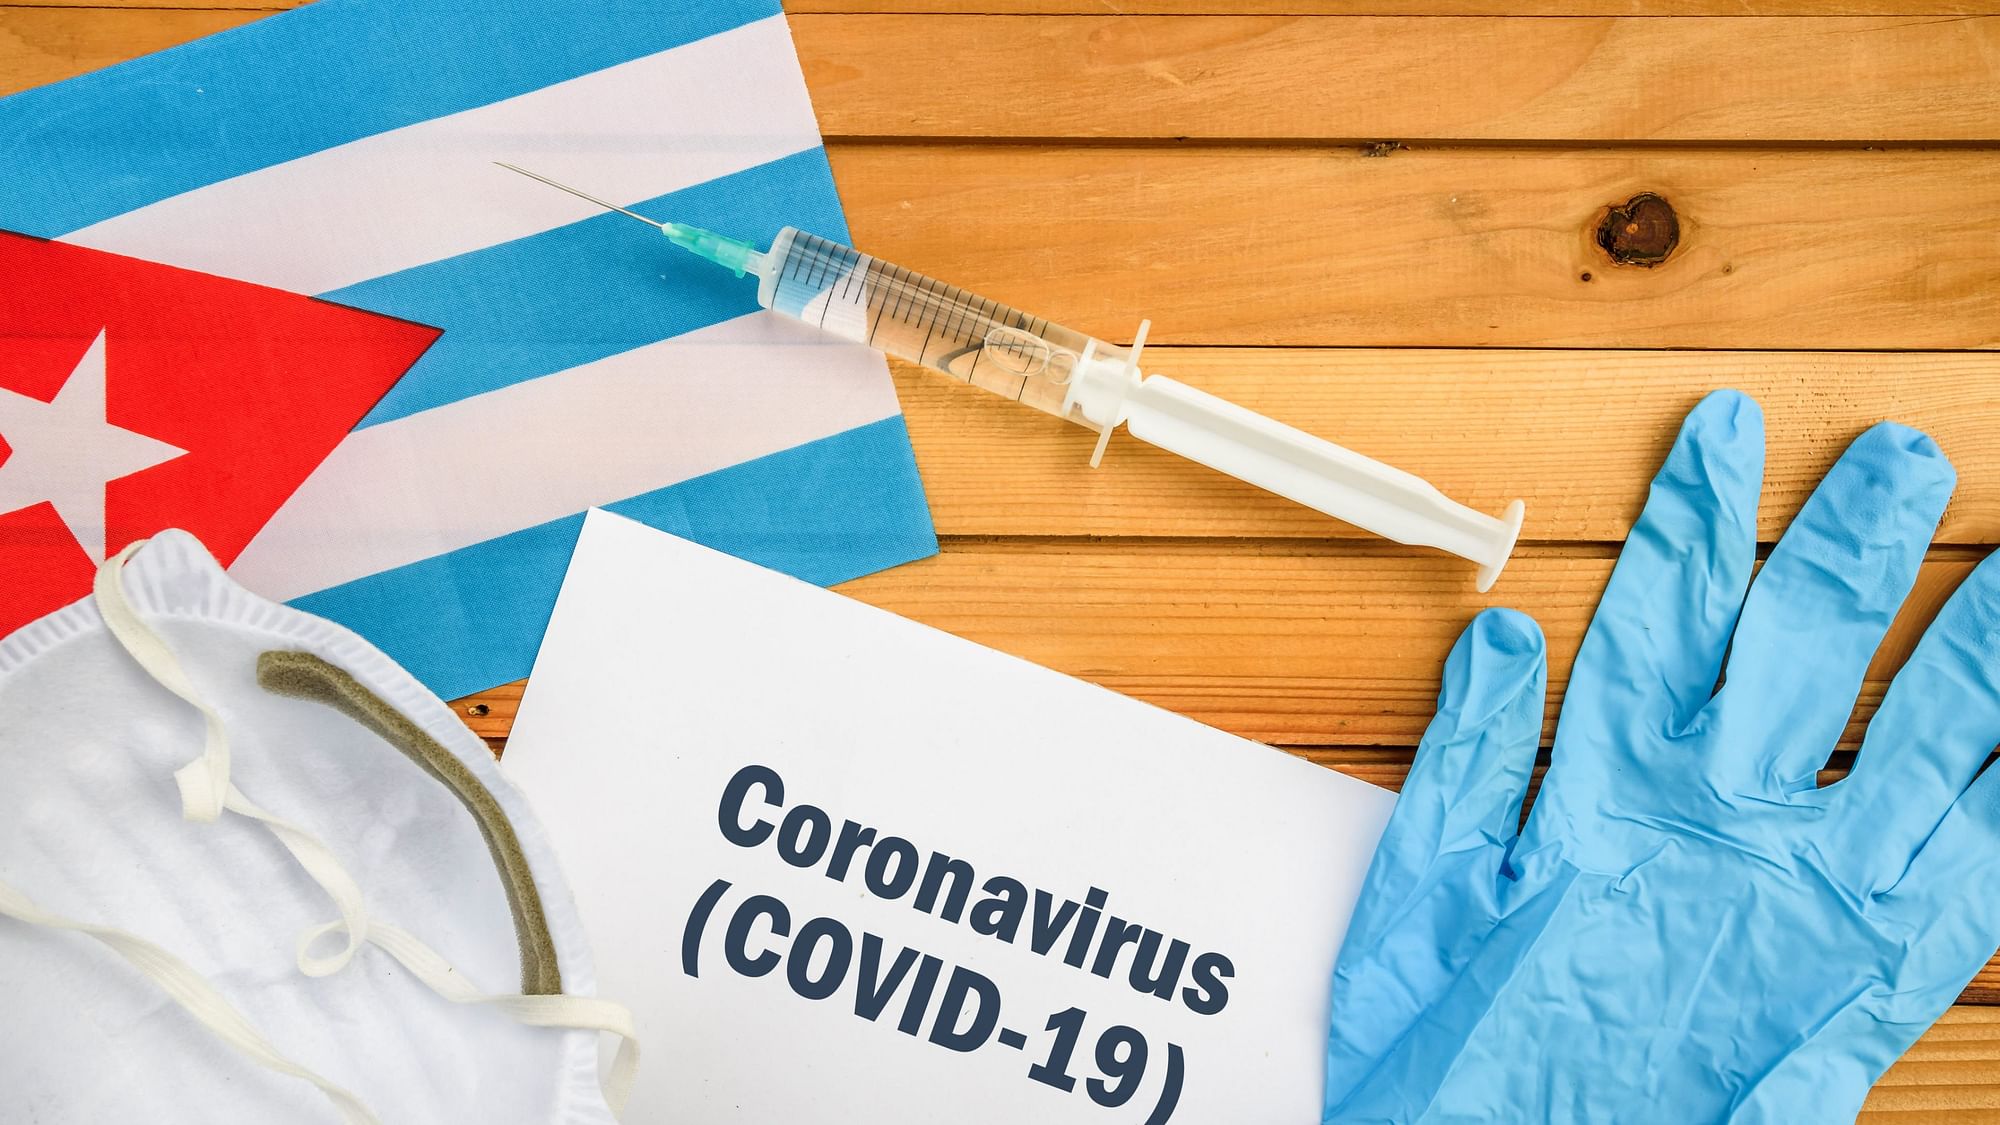 The Oxford coronavirus vaccines could be launched in India in January 2021, Pune-based Serum Institute chief Adar Poonawalla informed NDTV.